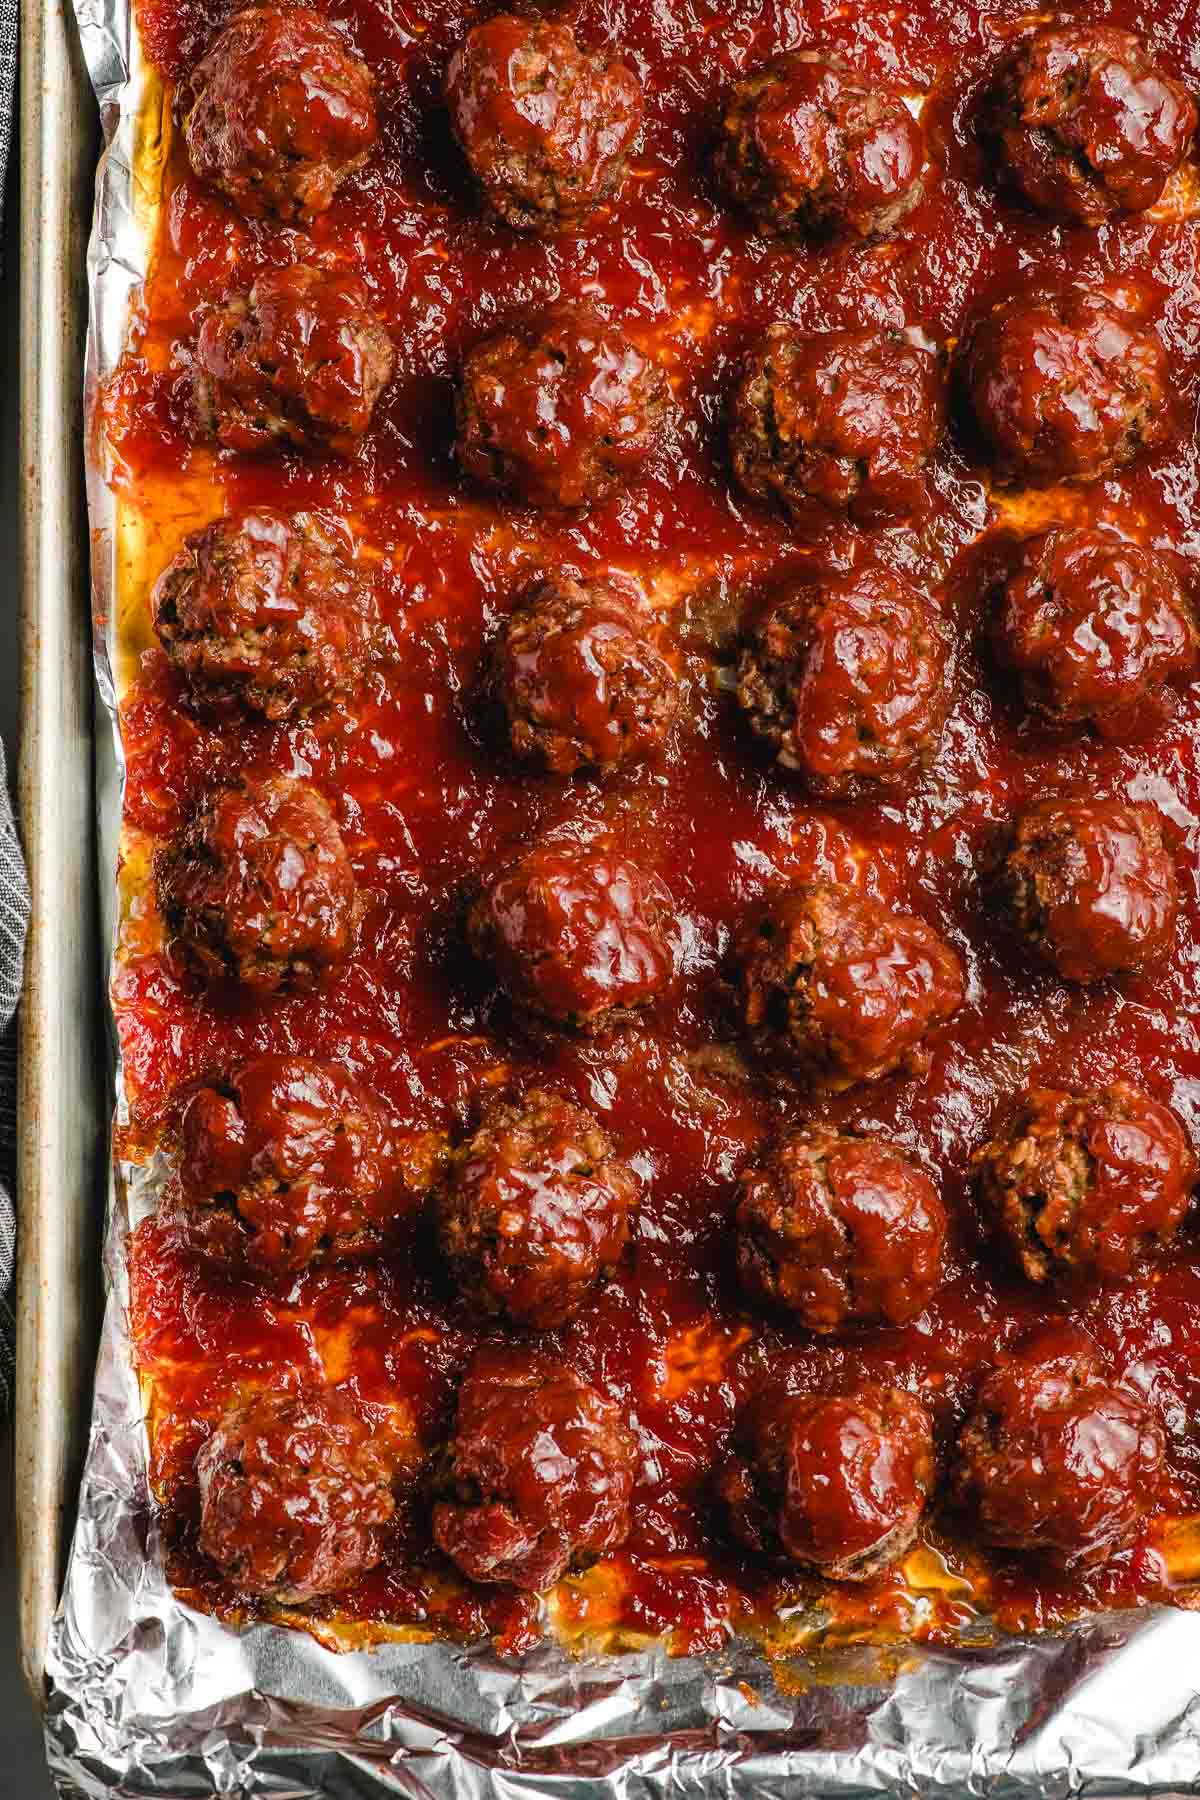 Oven baked bbq meatballs on a foil lined baking sheet.